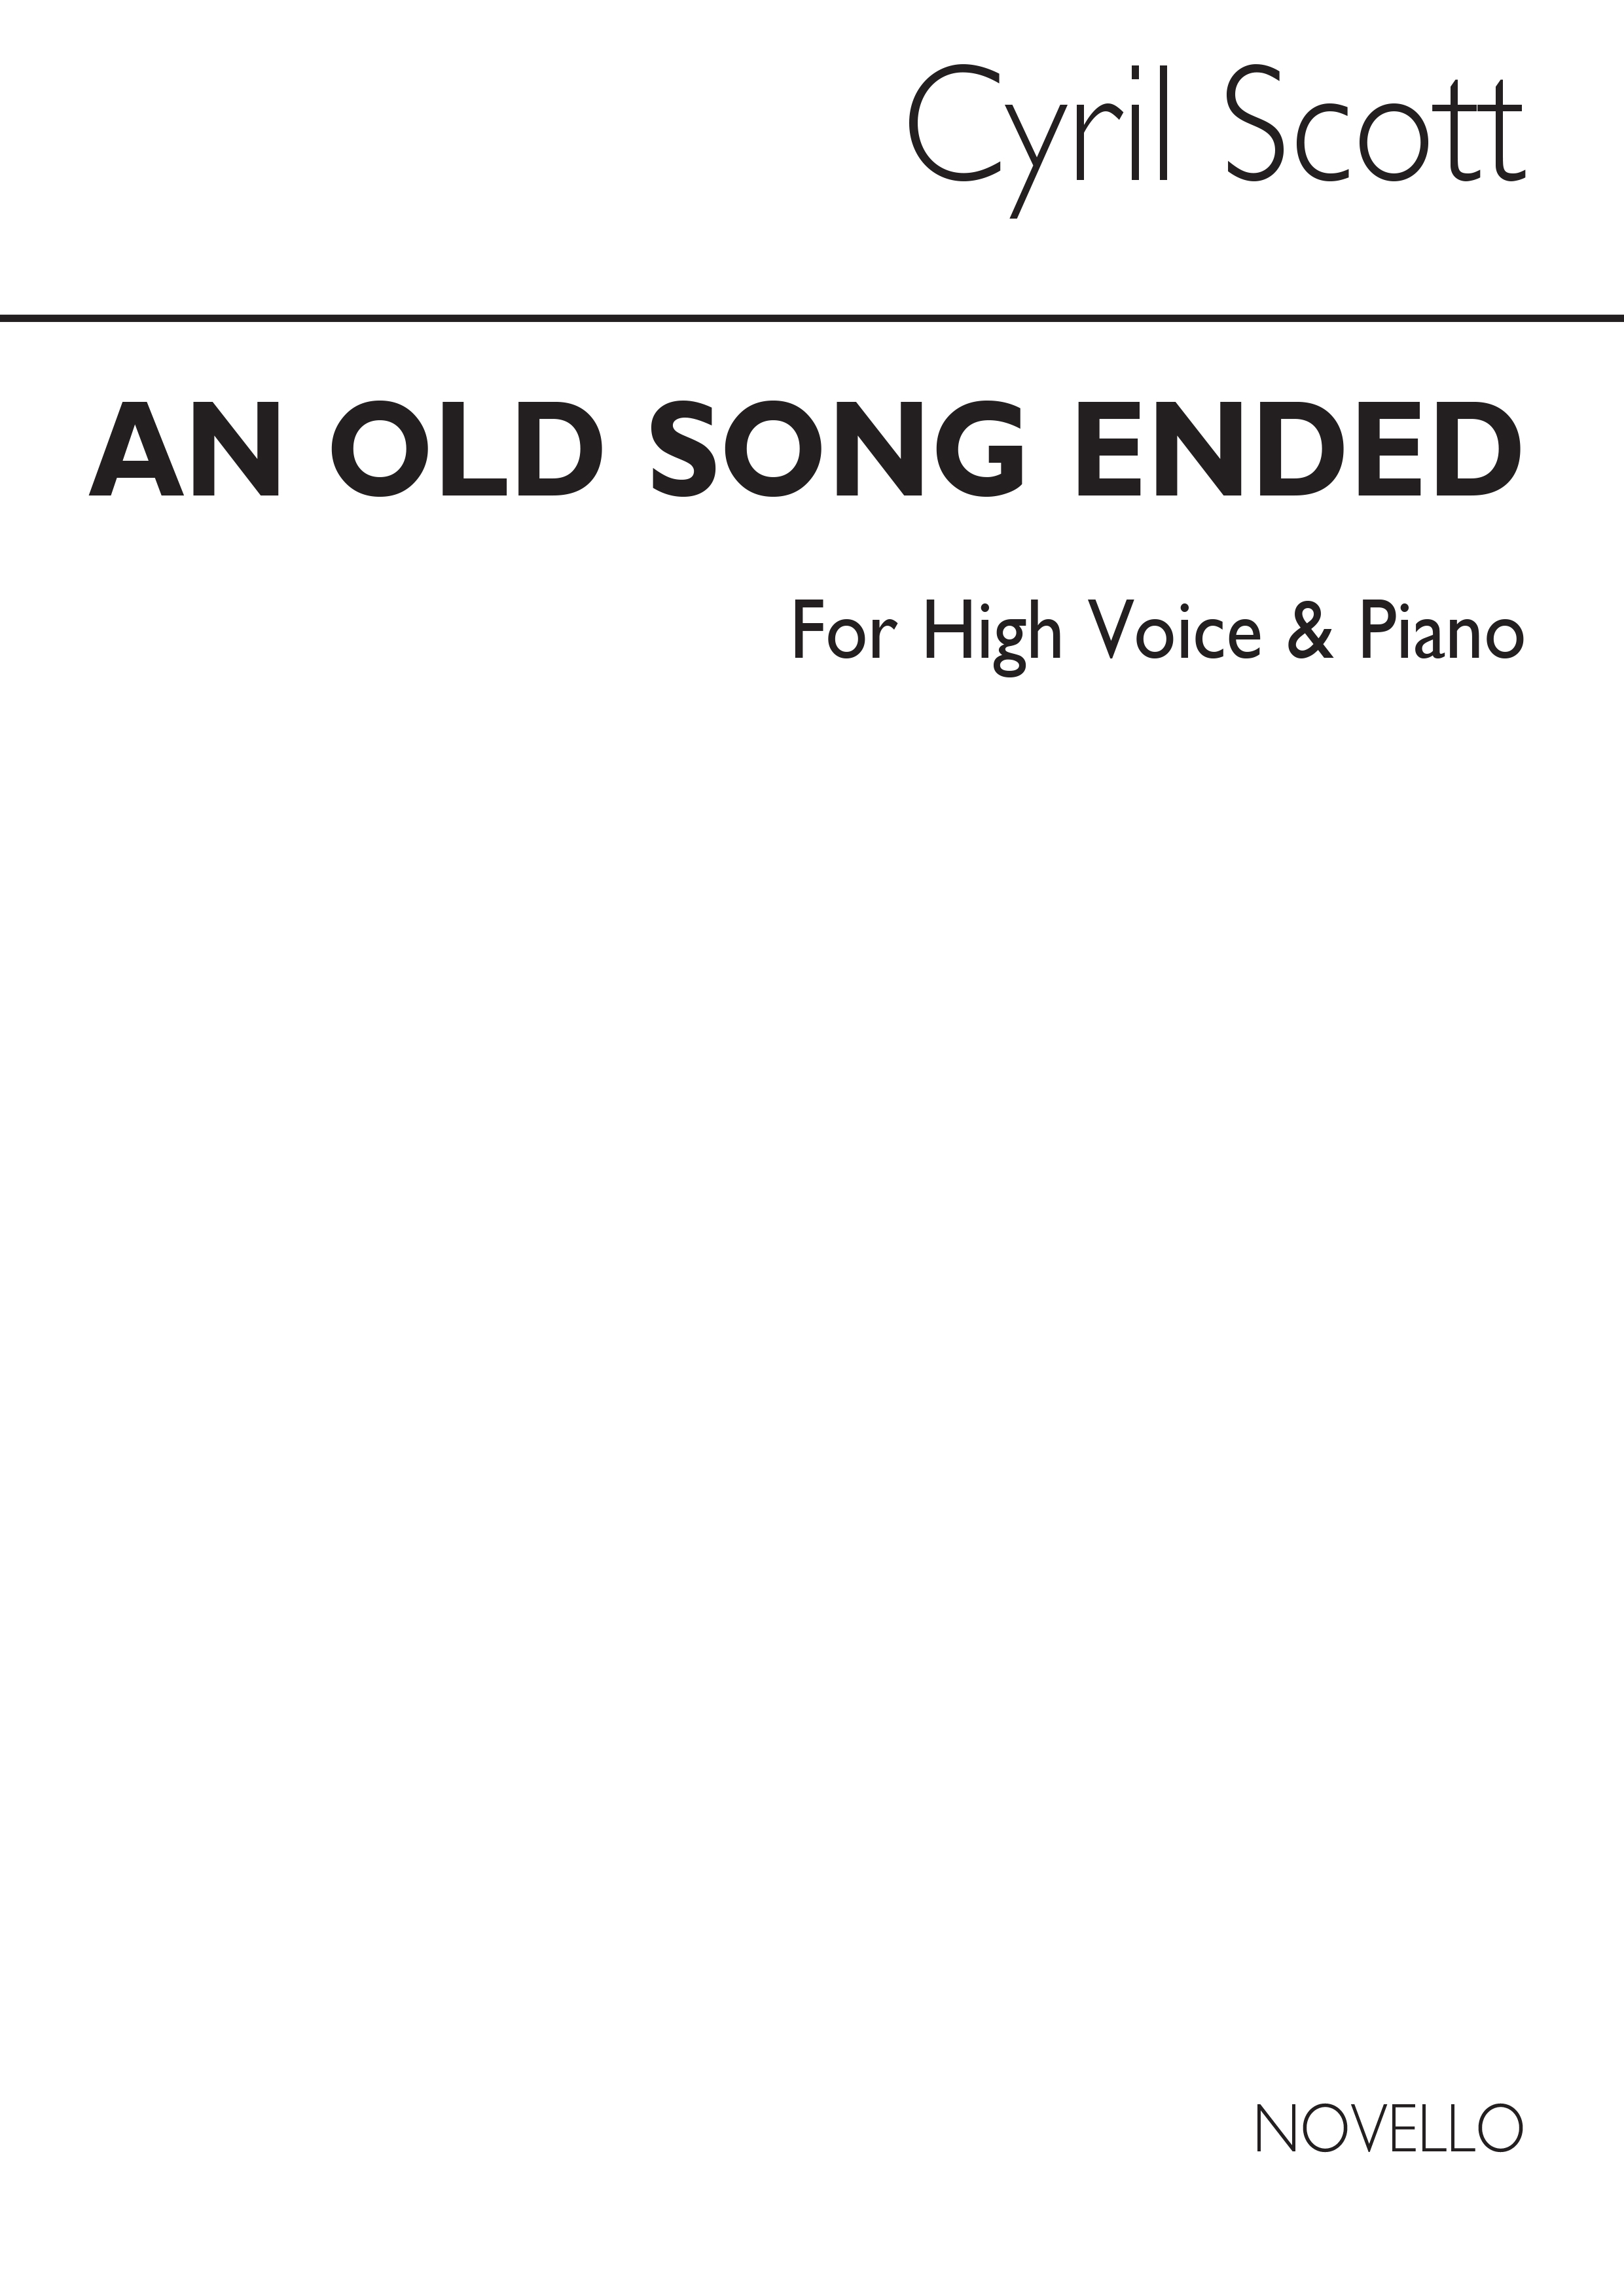 Cyril Scott: An Old Song Ended-high Voice/Piano (Key-f)